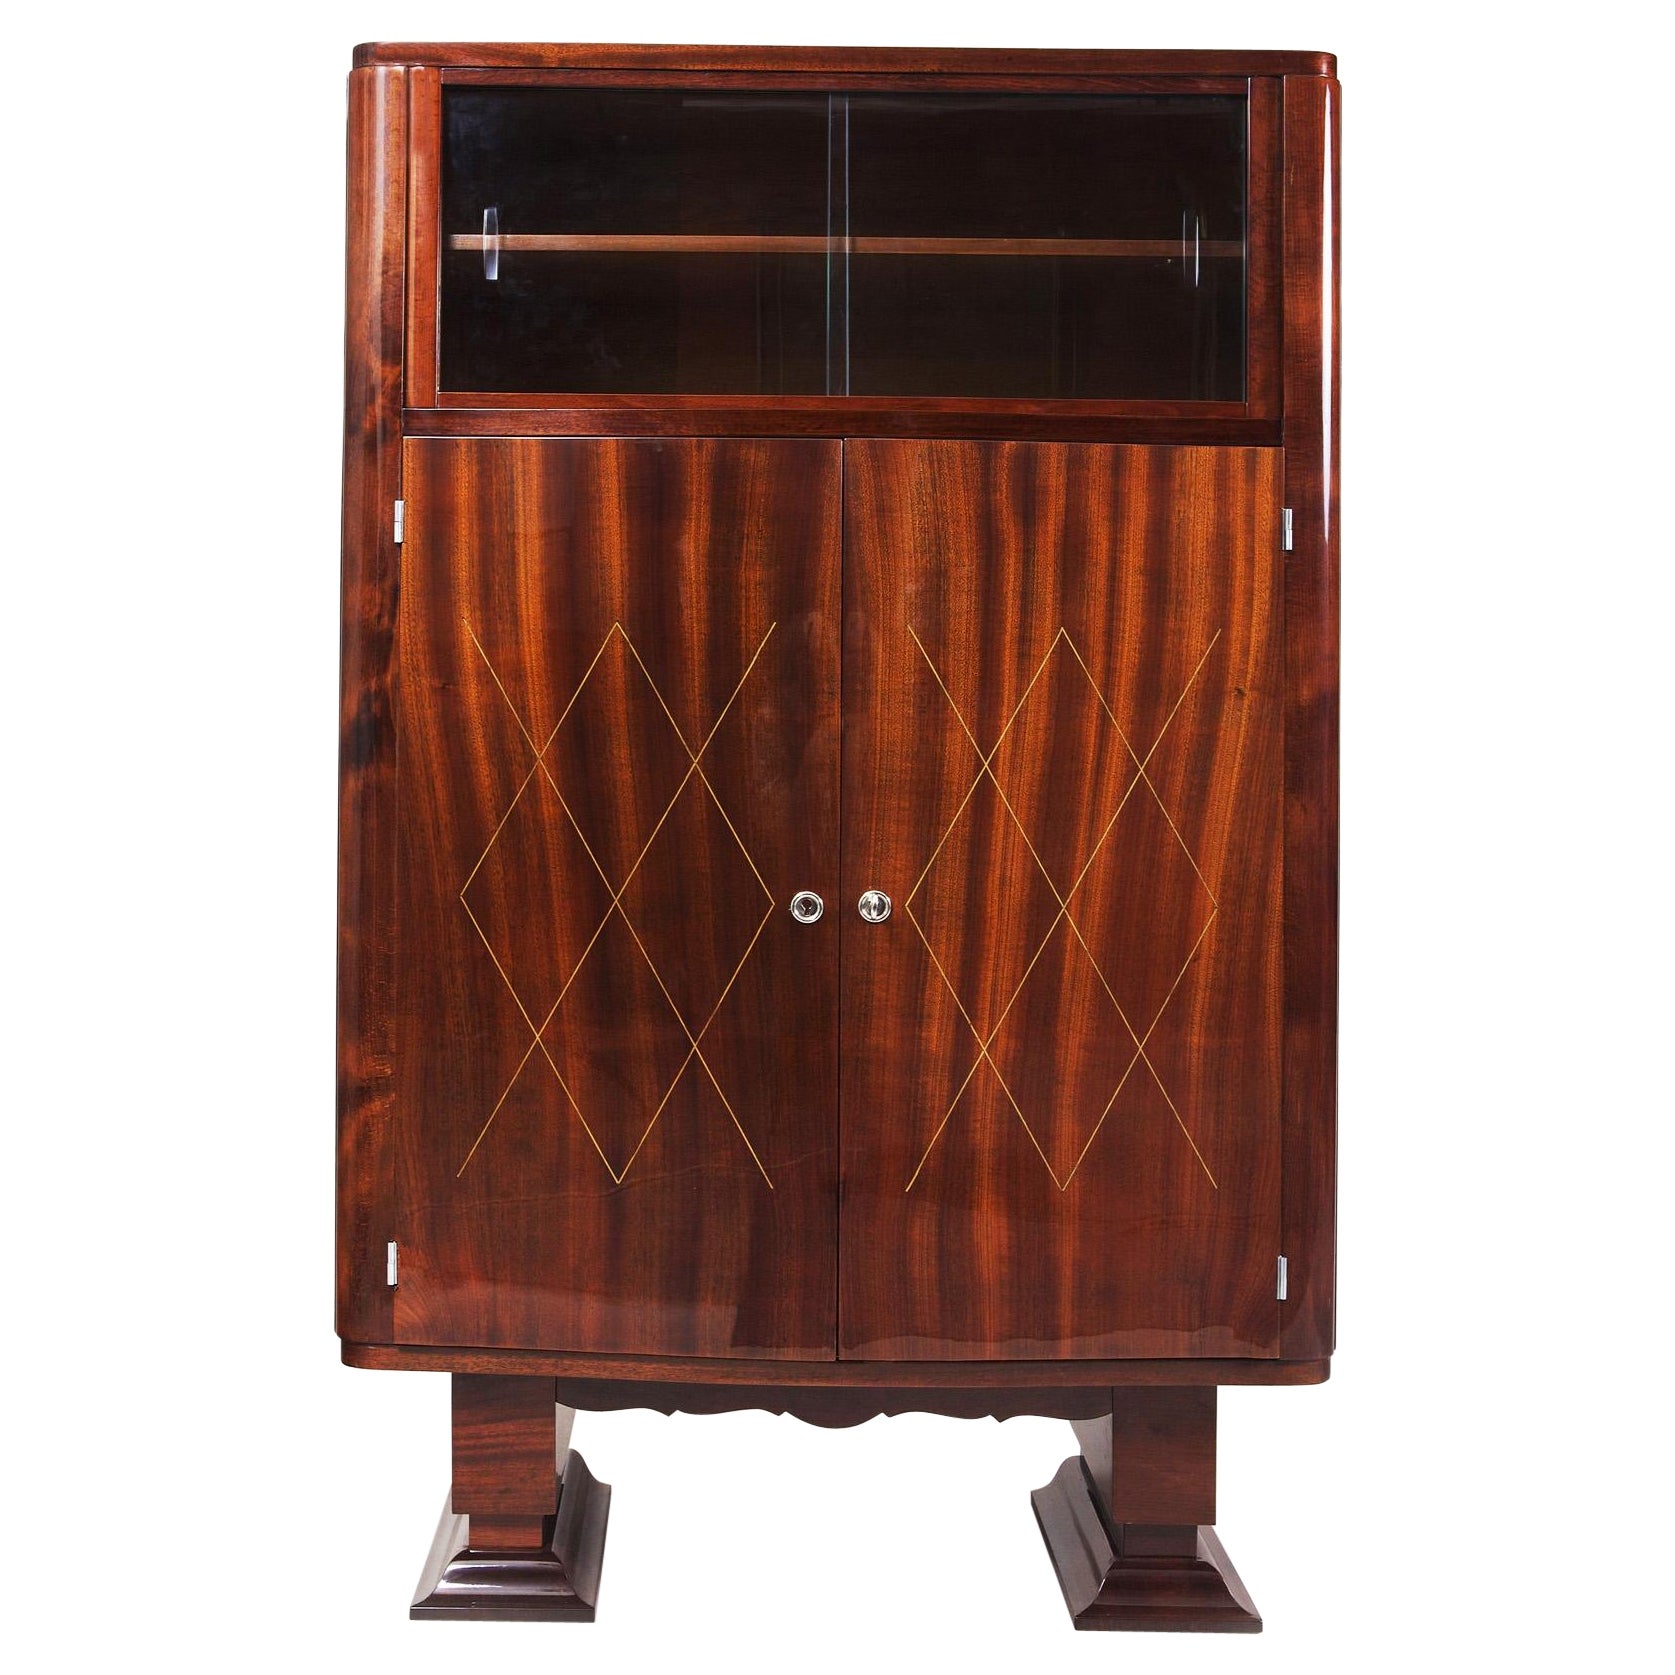 French Art Deco Display Cabinet, Made in the 1920s, Restored to High Gloss For Sale